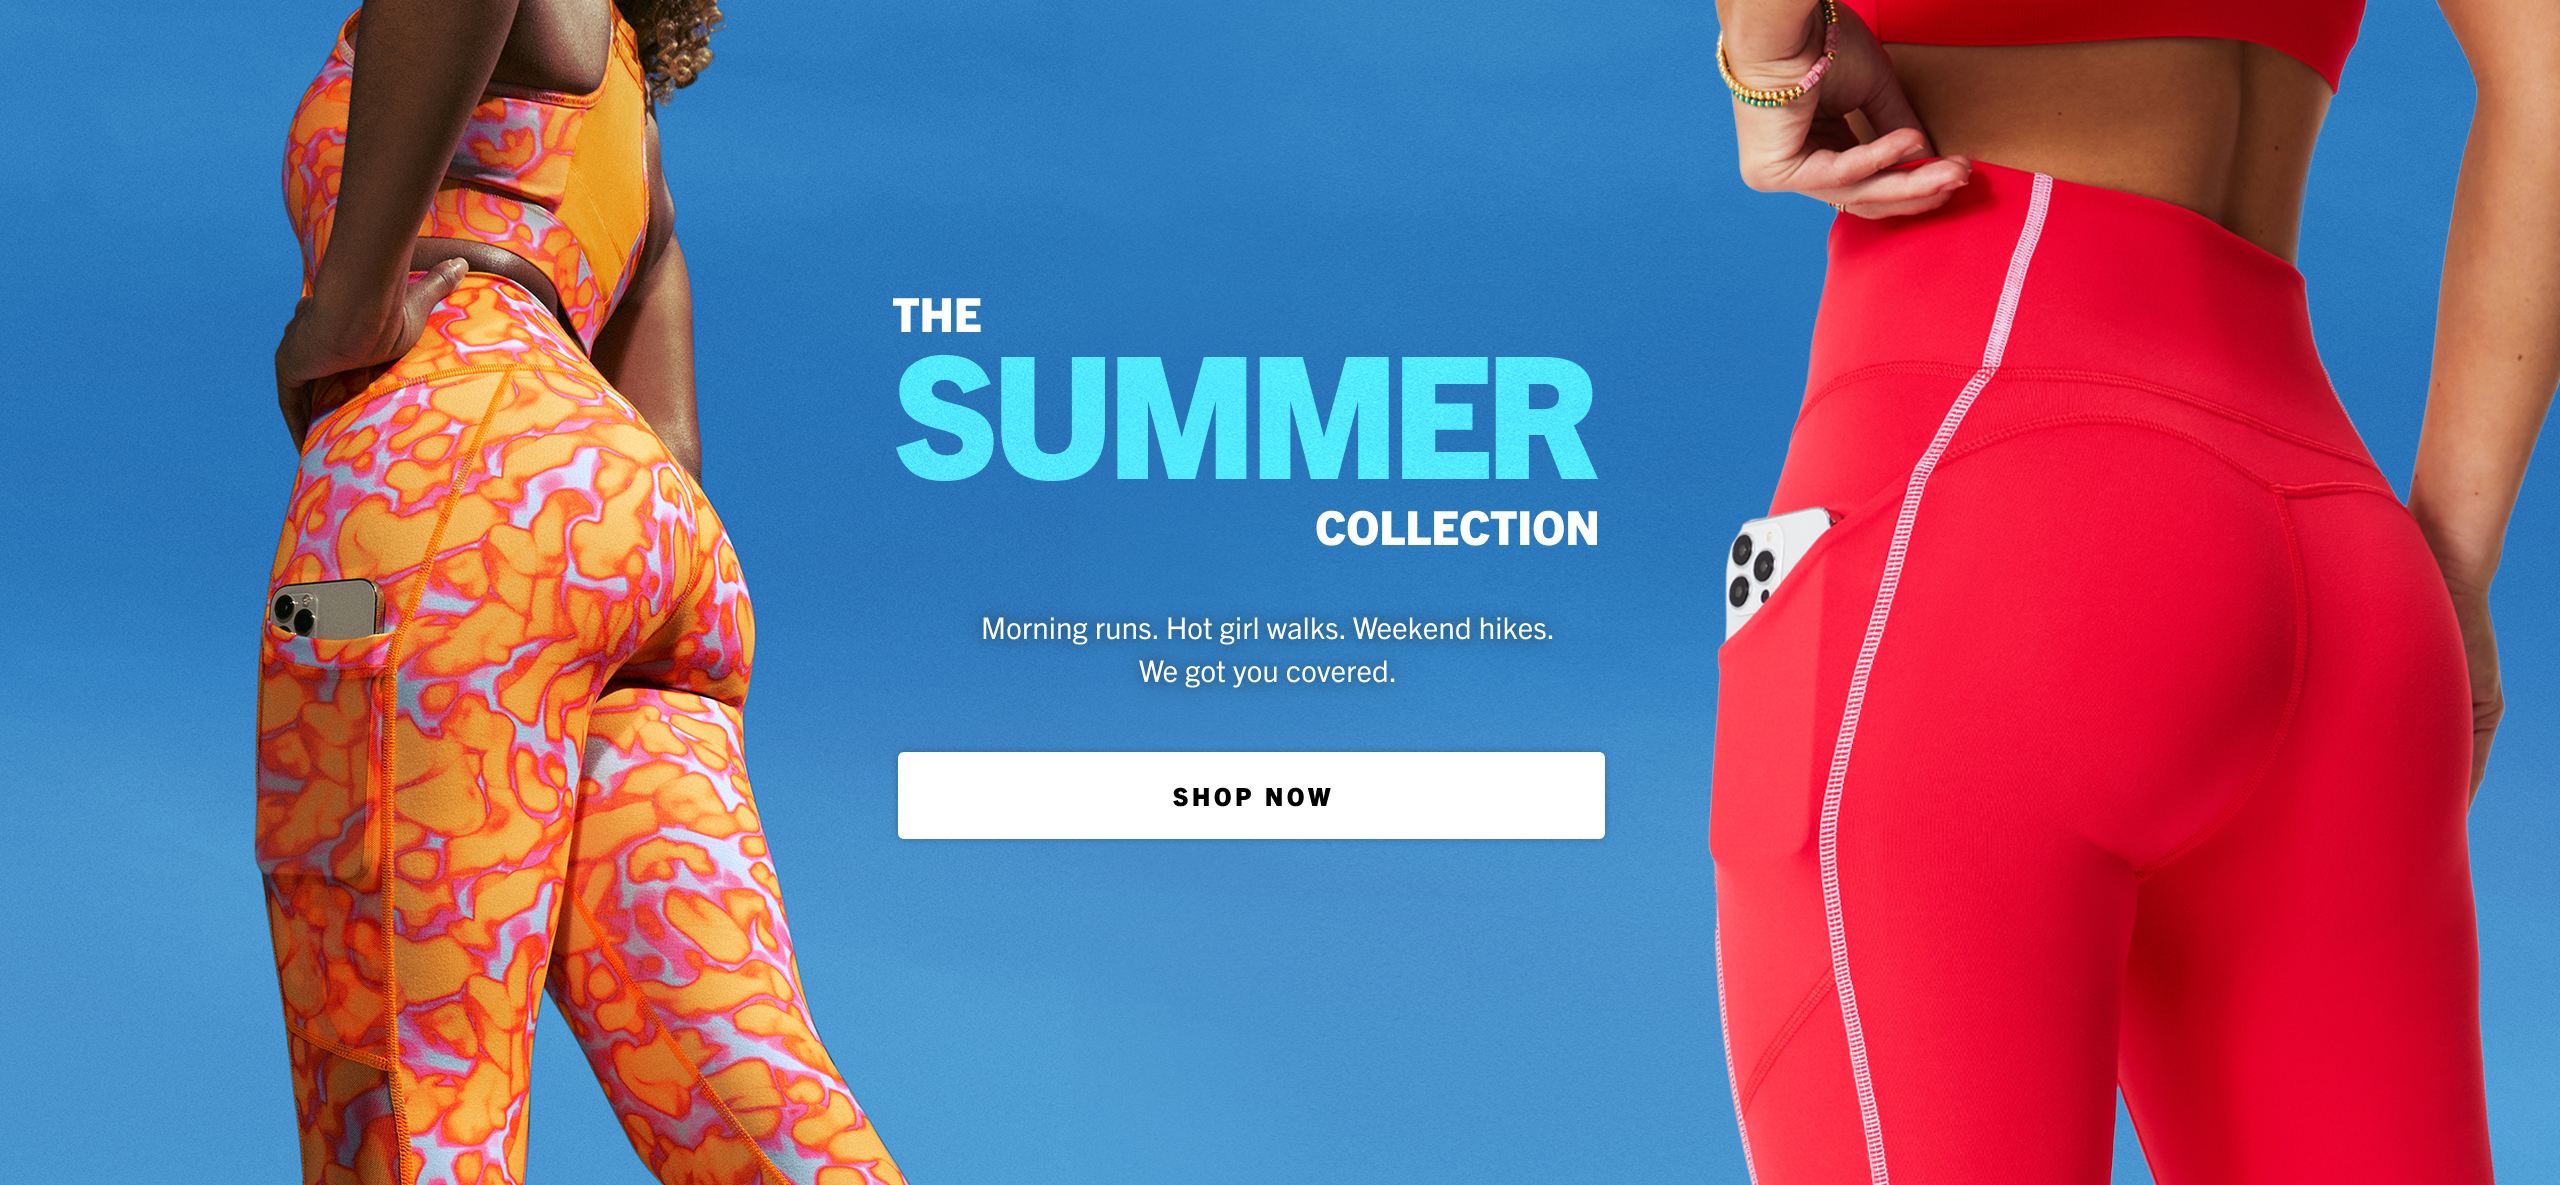 The summer collection: morning runs, hot girl walks, weekend hikes...we got you covered. Take the quiz to shop.